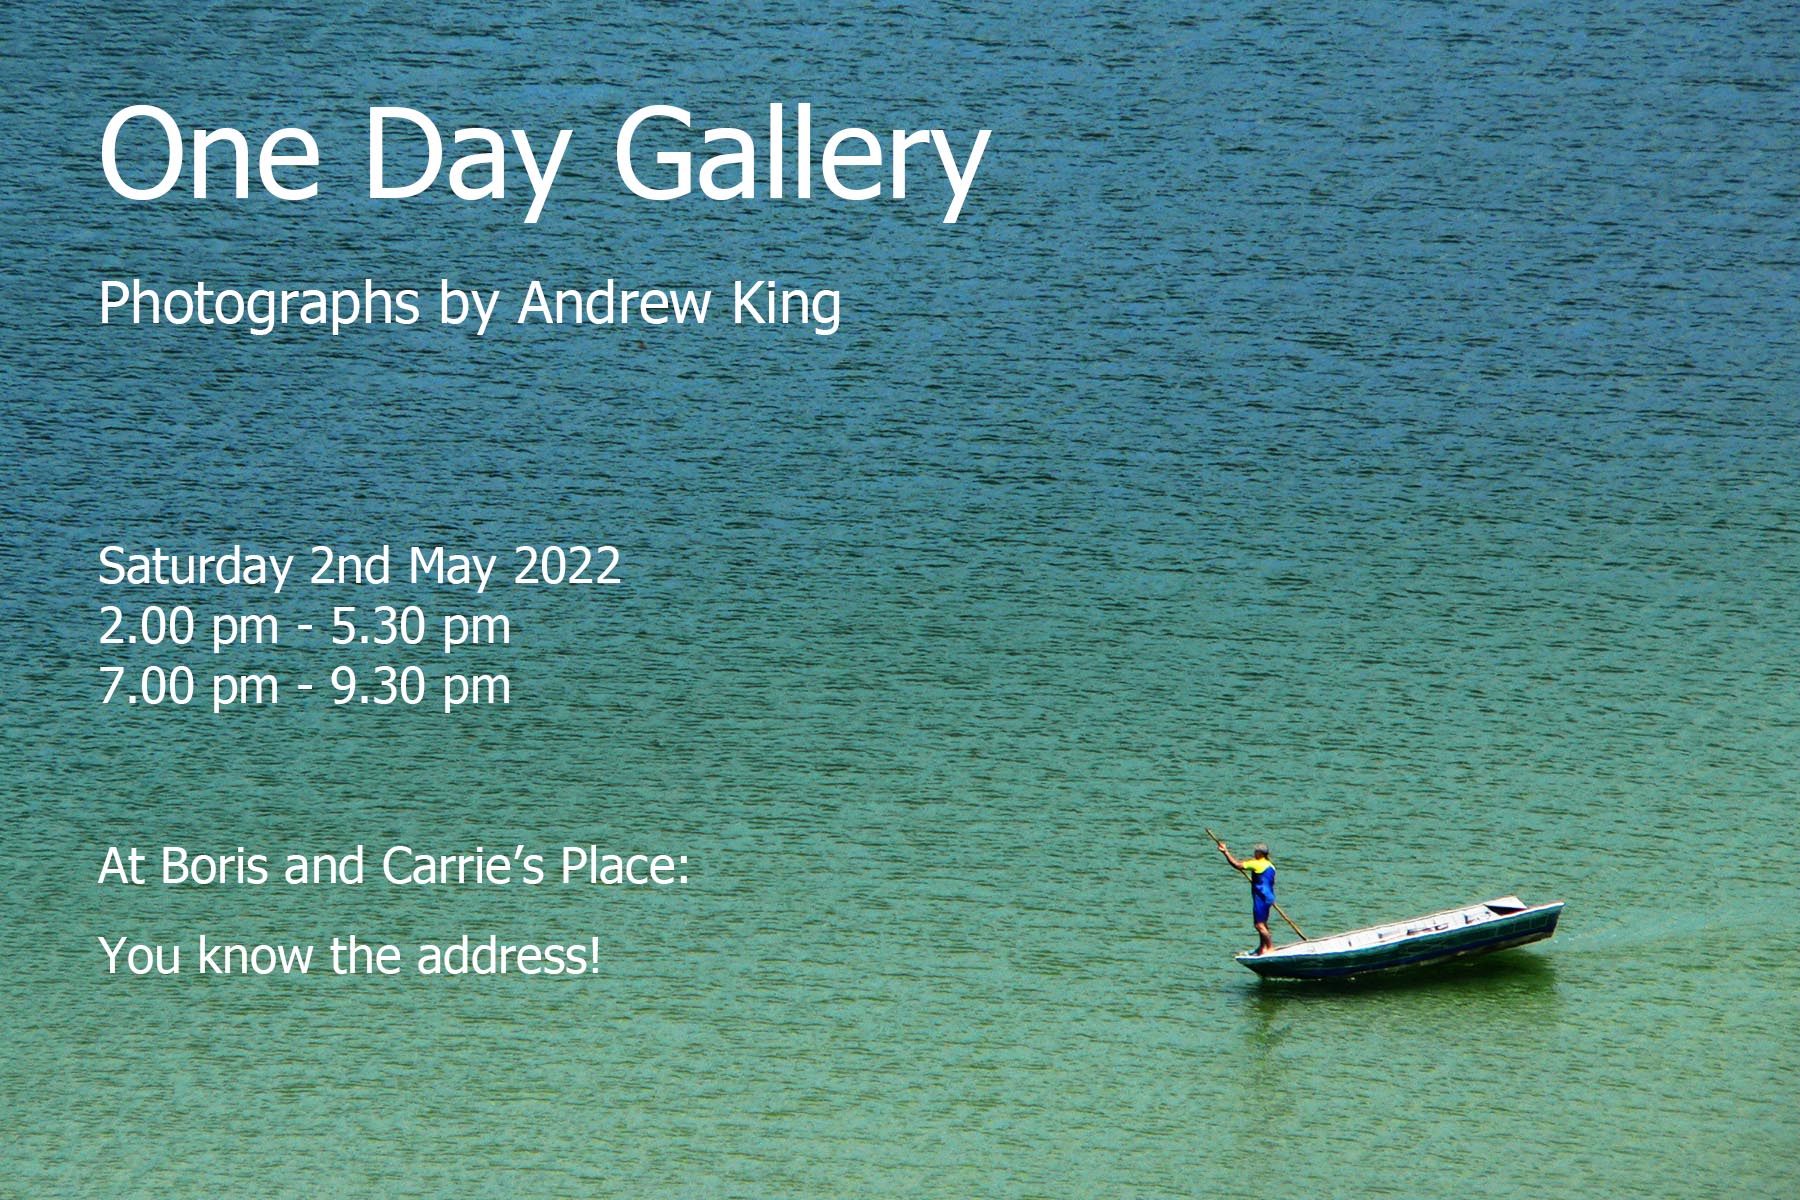 one day gallery invitation